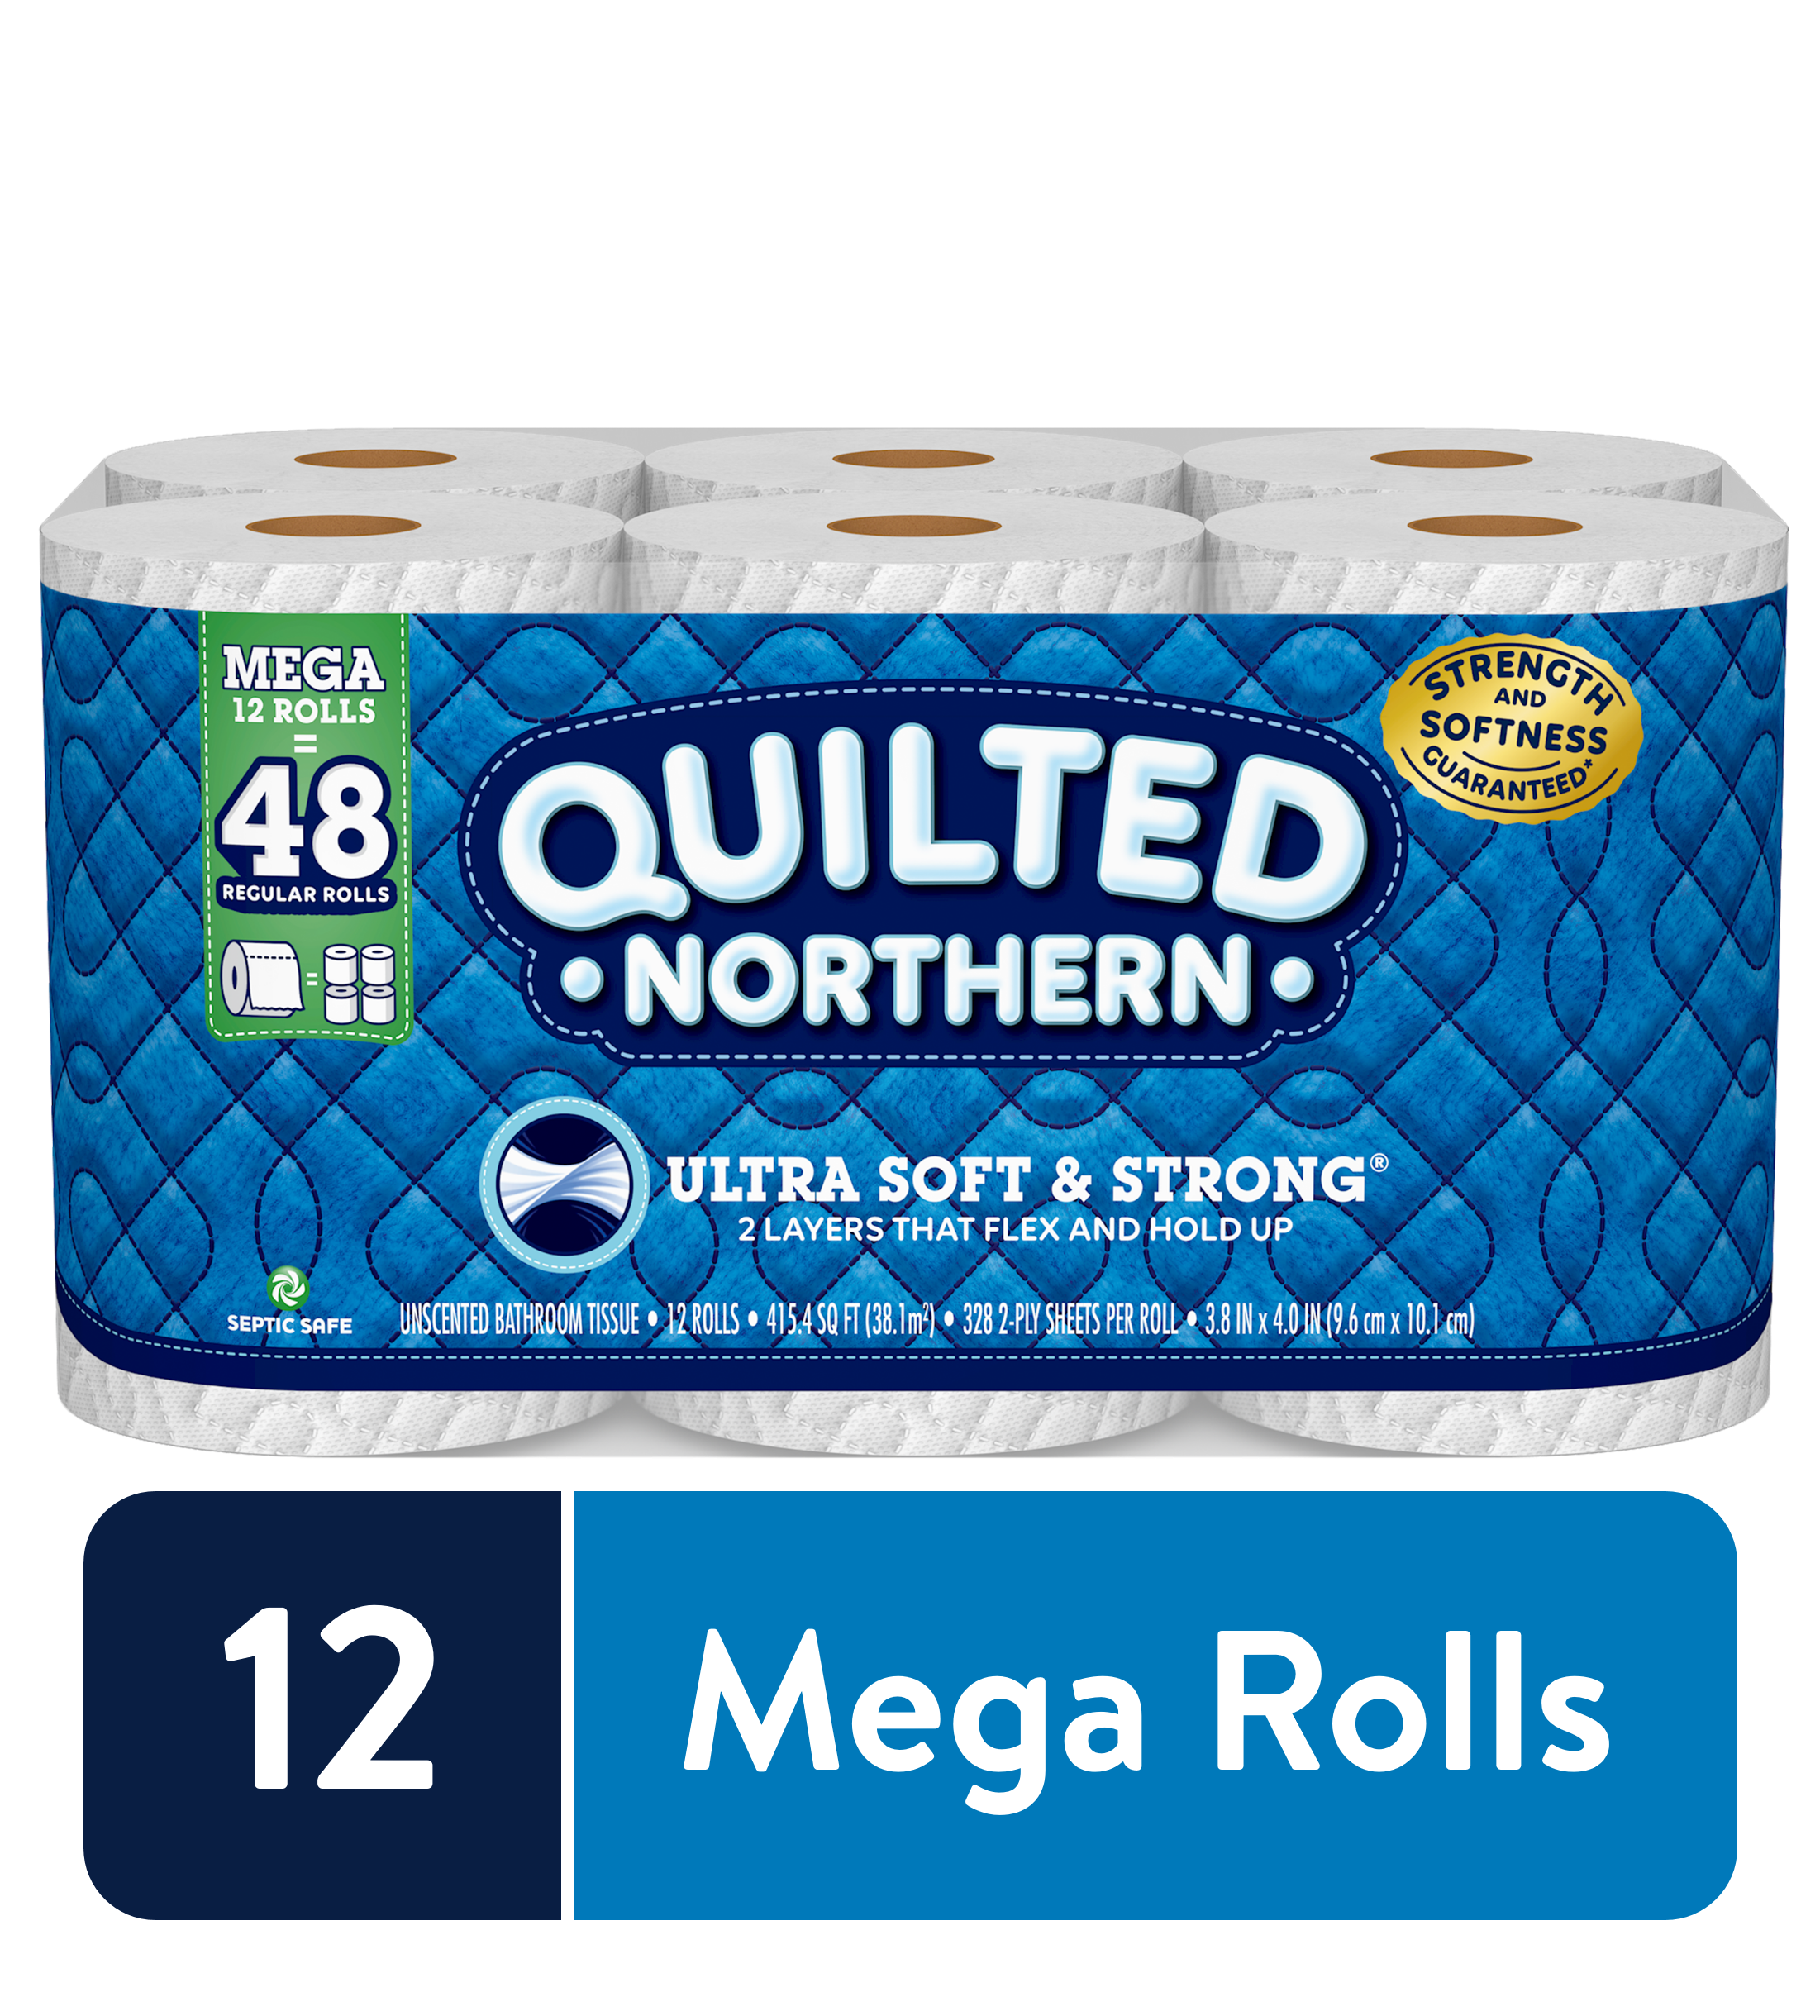 Quilted Northern Ultra Soft & Strong Toilet Paper, 12 Mega Rolls (= 48 Regular Rolls) - image 1 of 9